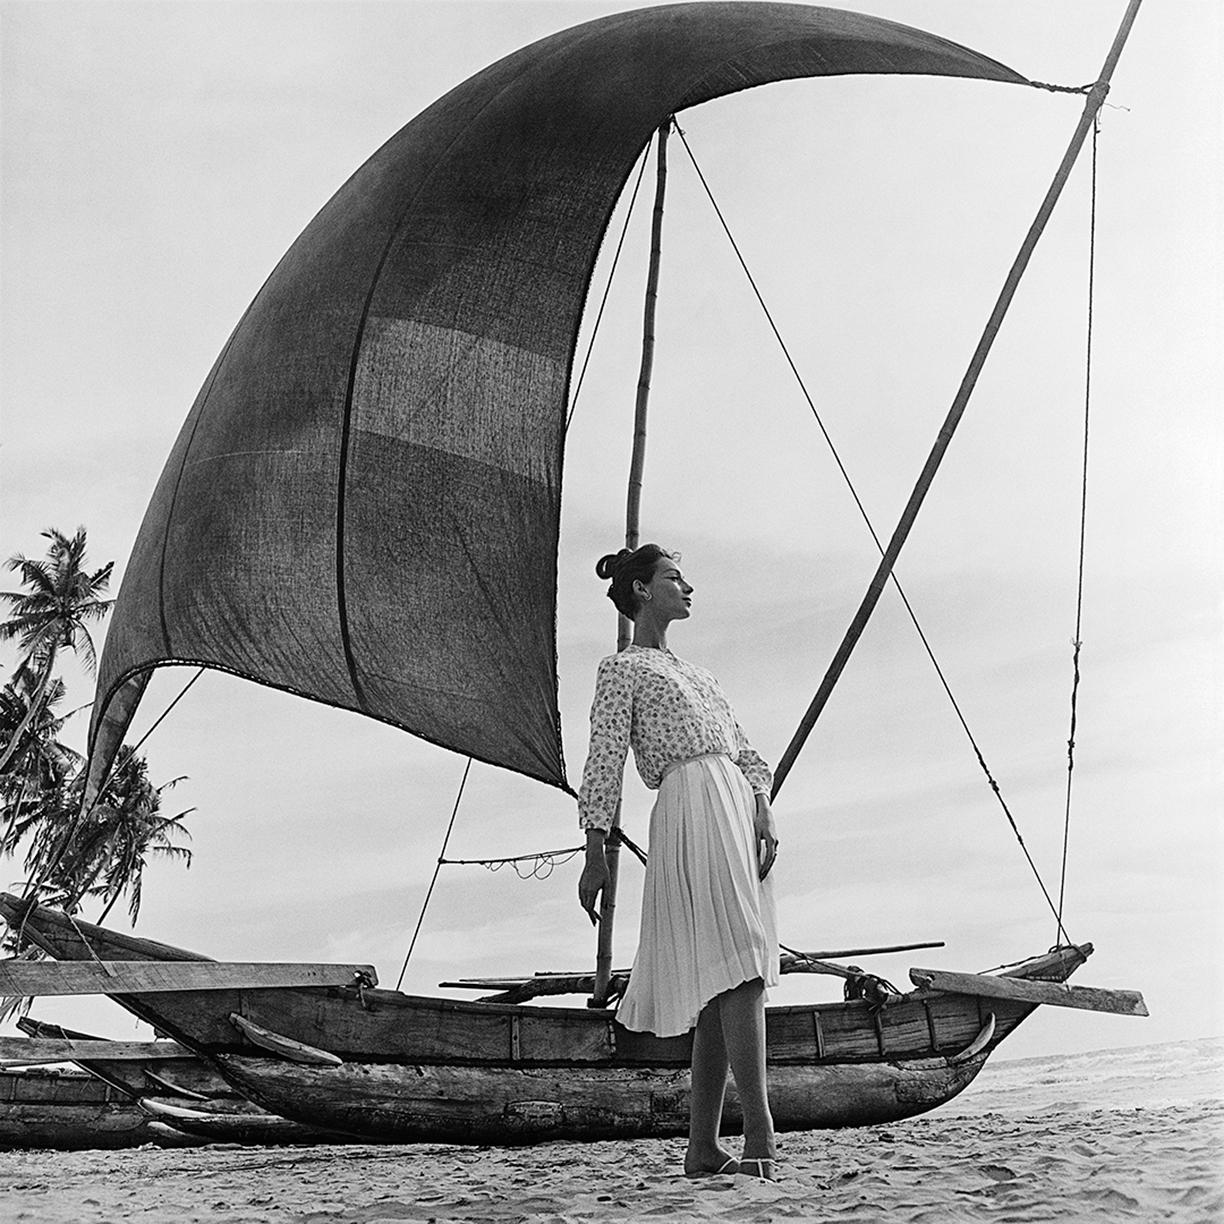 Selected from the Derujinsky: Around The World Portfolio, shot in Ceylon for Harper's Bazaar

Artist: Gleb Derujinsky

Title: Ceylon Sails

Year Exposed: 1957

Estate Edition: signed, stamped and numbered on verso. Signed by Andrea Derujinsky.